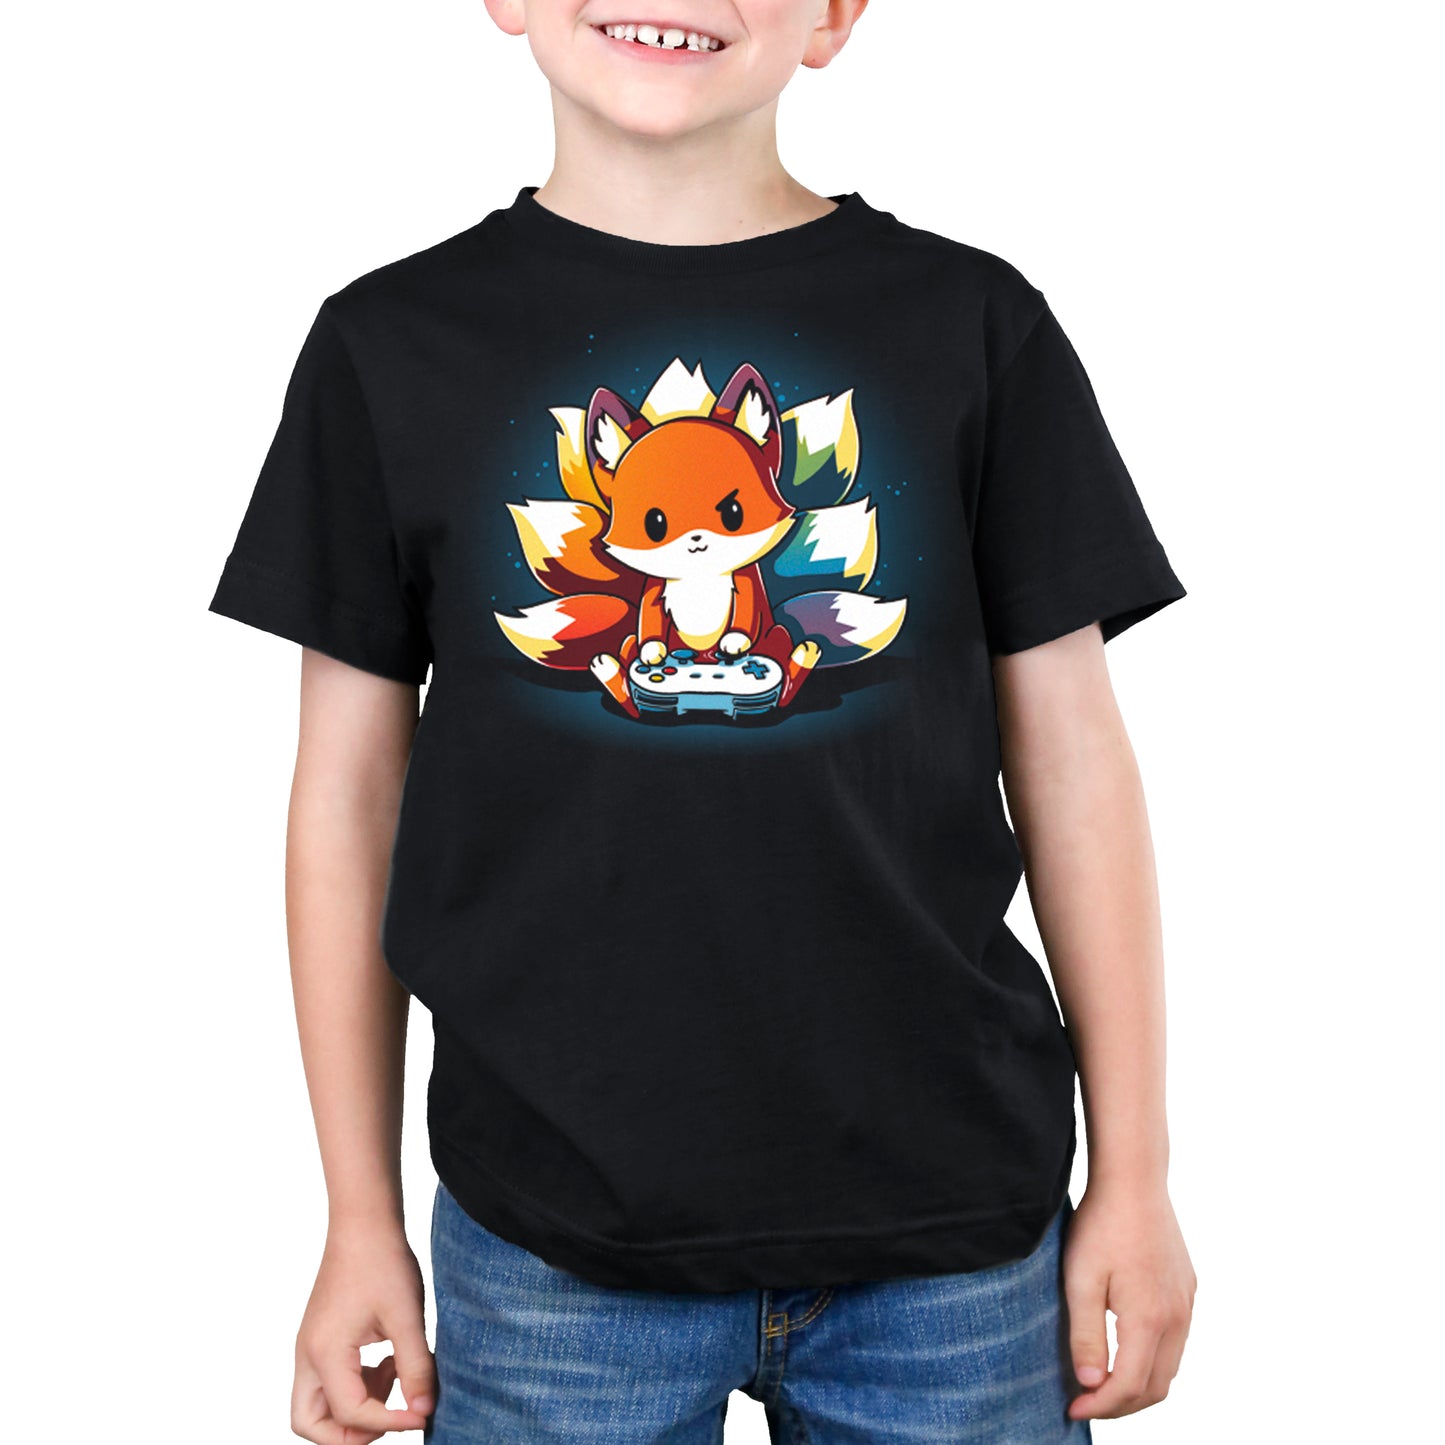 A young boy wearing a TeeTurtle Rainbow Gamer t-shirt with an image of a fox.